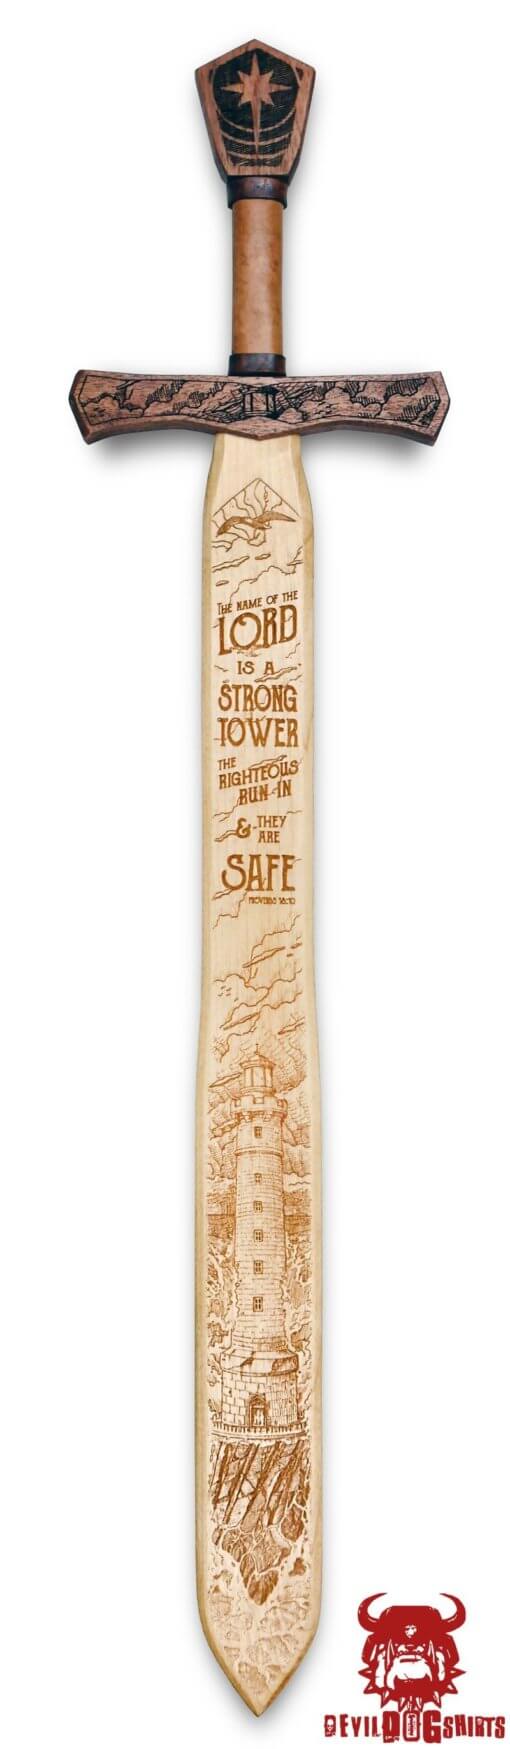 USMC The Name of The Lord is a Strong Tower Wood Sword